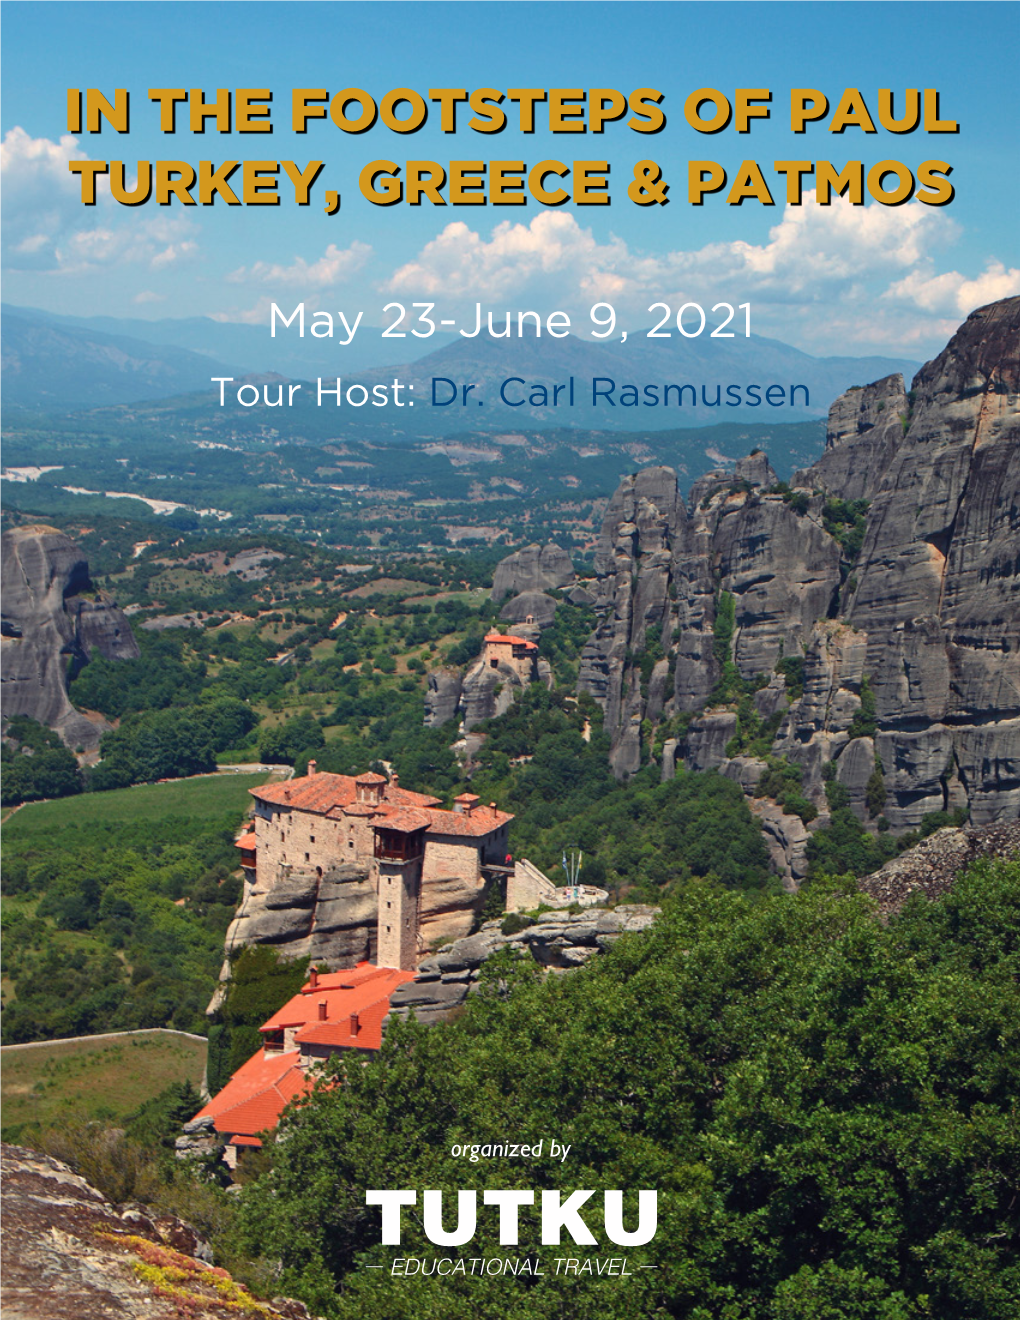 In the Footsteps of Paul Turkey, Greece & Patmos